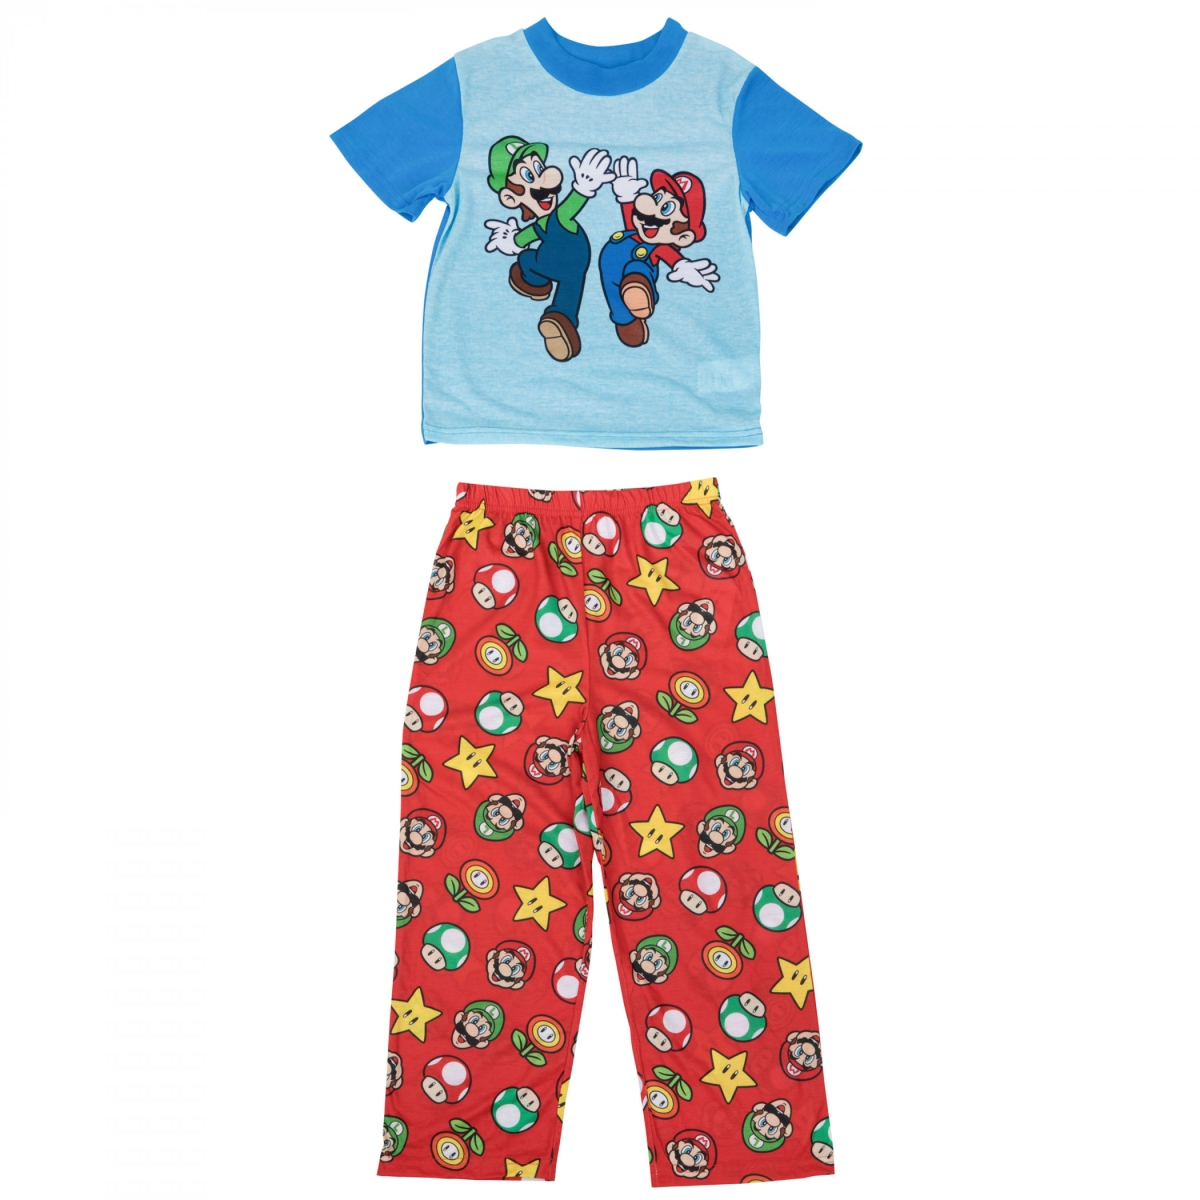 Picture of Super Mario Bros 856224-size6 High Five Pajama Set - Blue & Red - Size 6 - 2 Piece